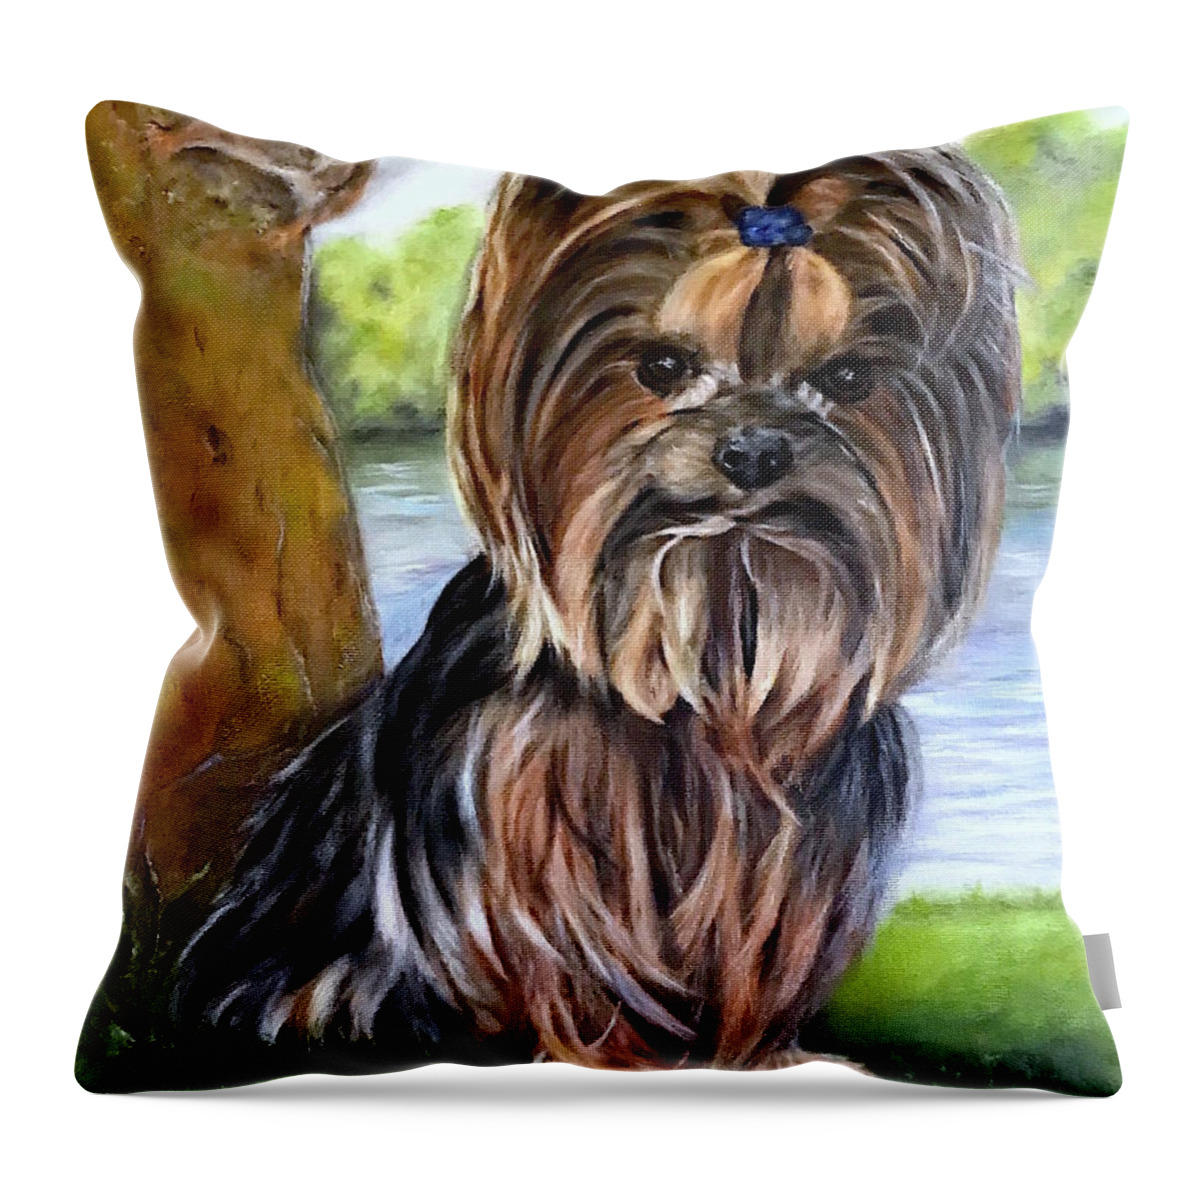 Yorkie Terrer Throw Pillow featuring the painting Wanna Play? by Dr Pat Gehr